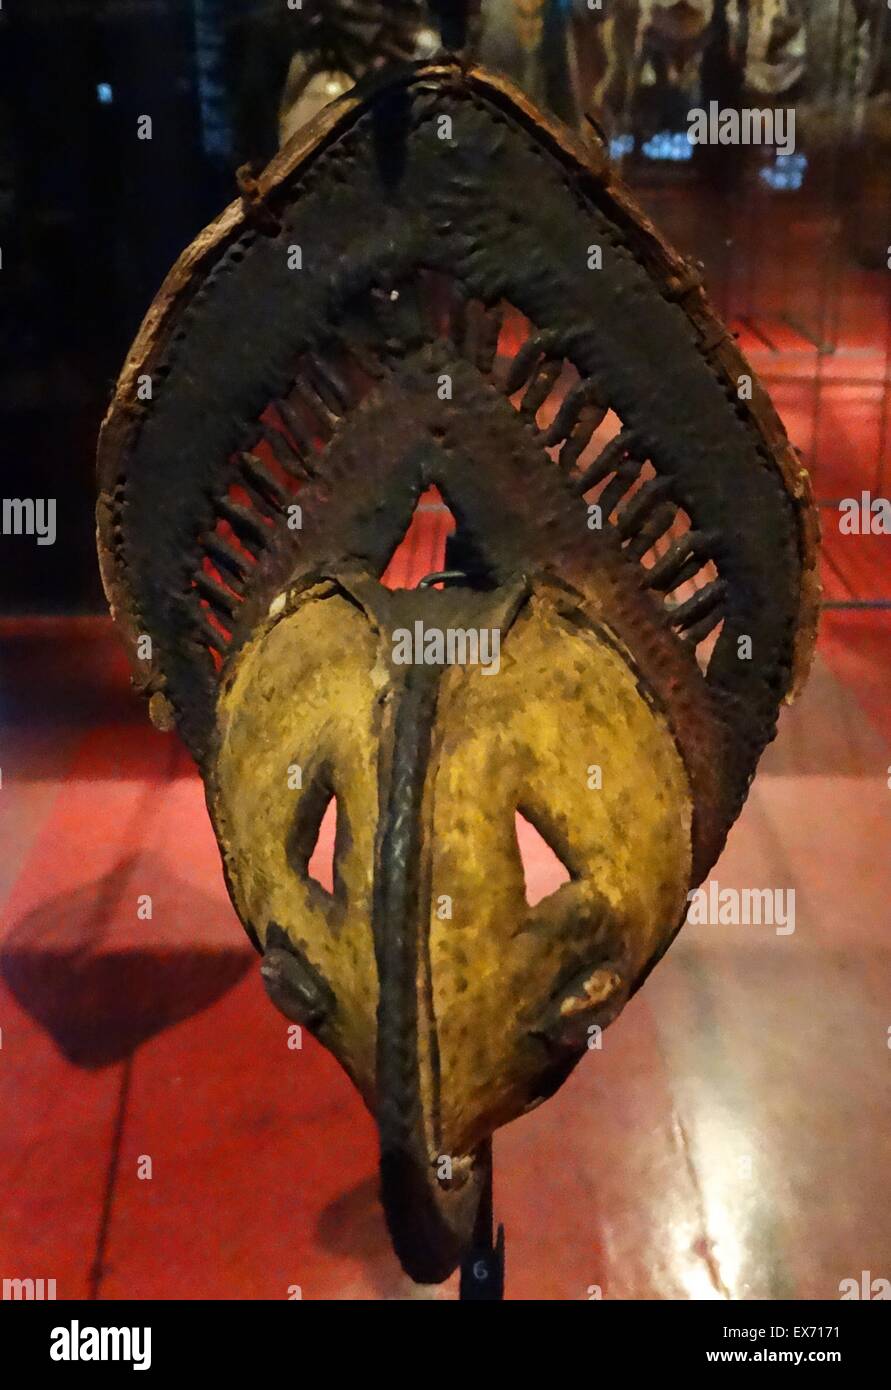 Melanesian Abelam tribal Yam mask made from basketry and painted with natural pigments. from Papua New Guinea mid 20th century. One of the major focuses of ceremonial life among the Abelam people of northeast New Guinea is the competitive growth and excha Stock Photo